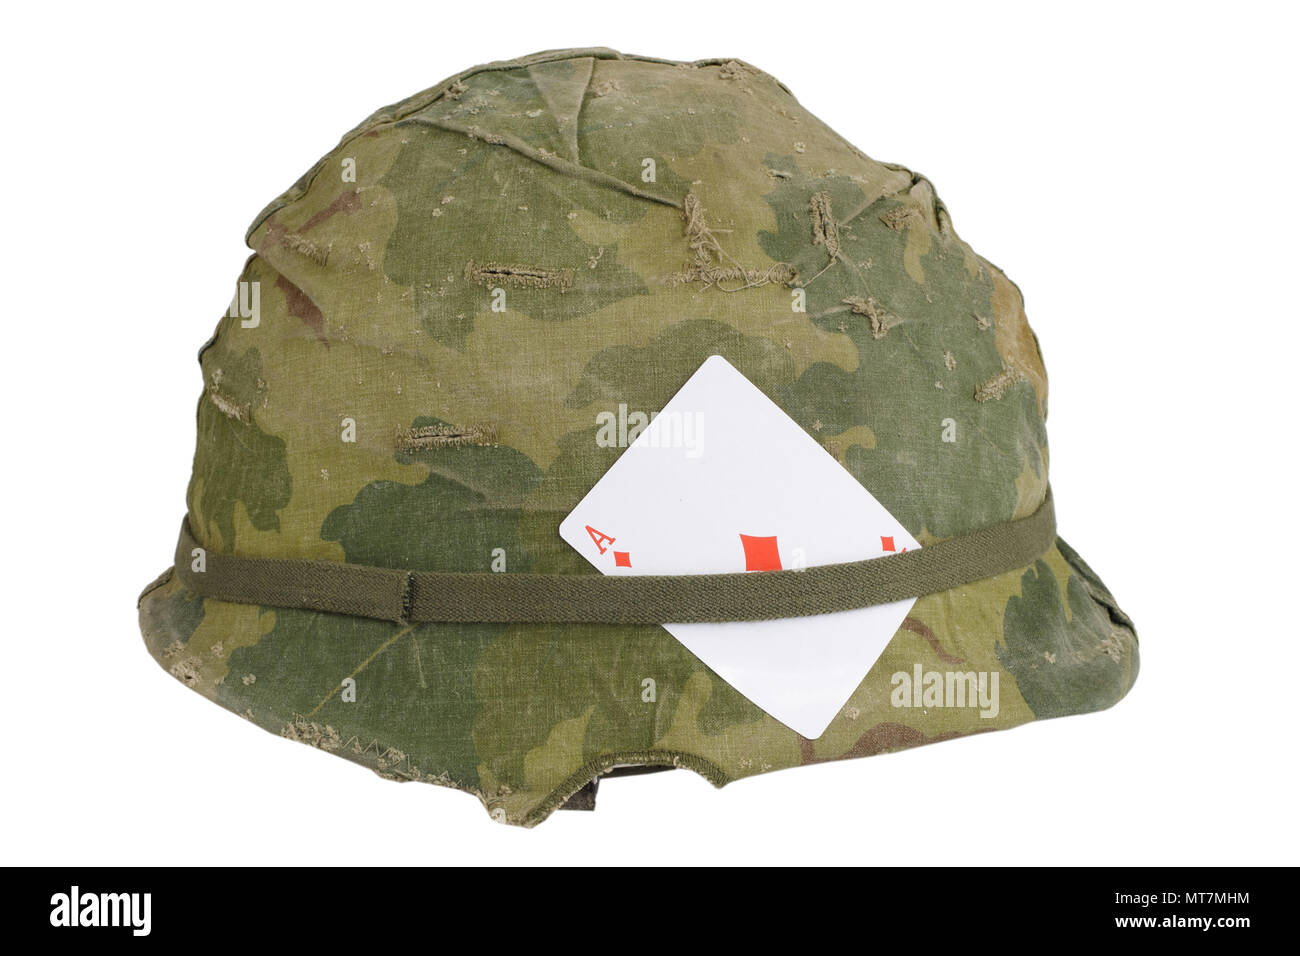 US Army helmet Vietnam war period with camouflage cover and ammo belt ...